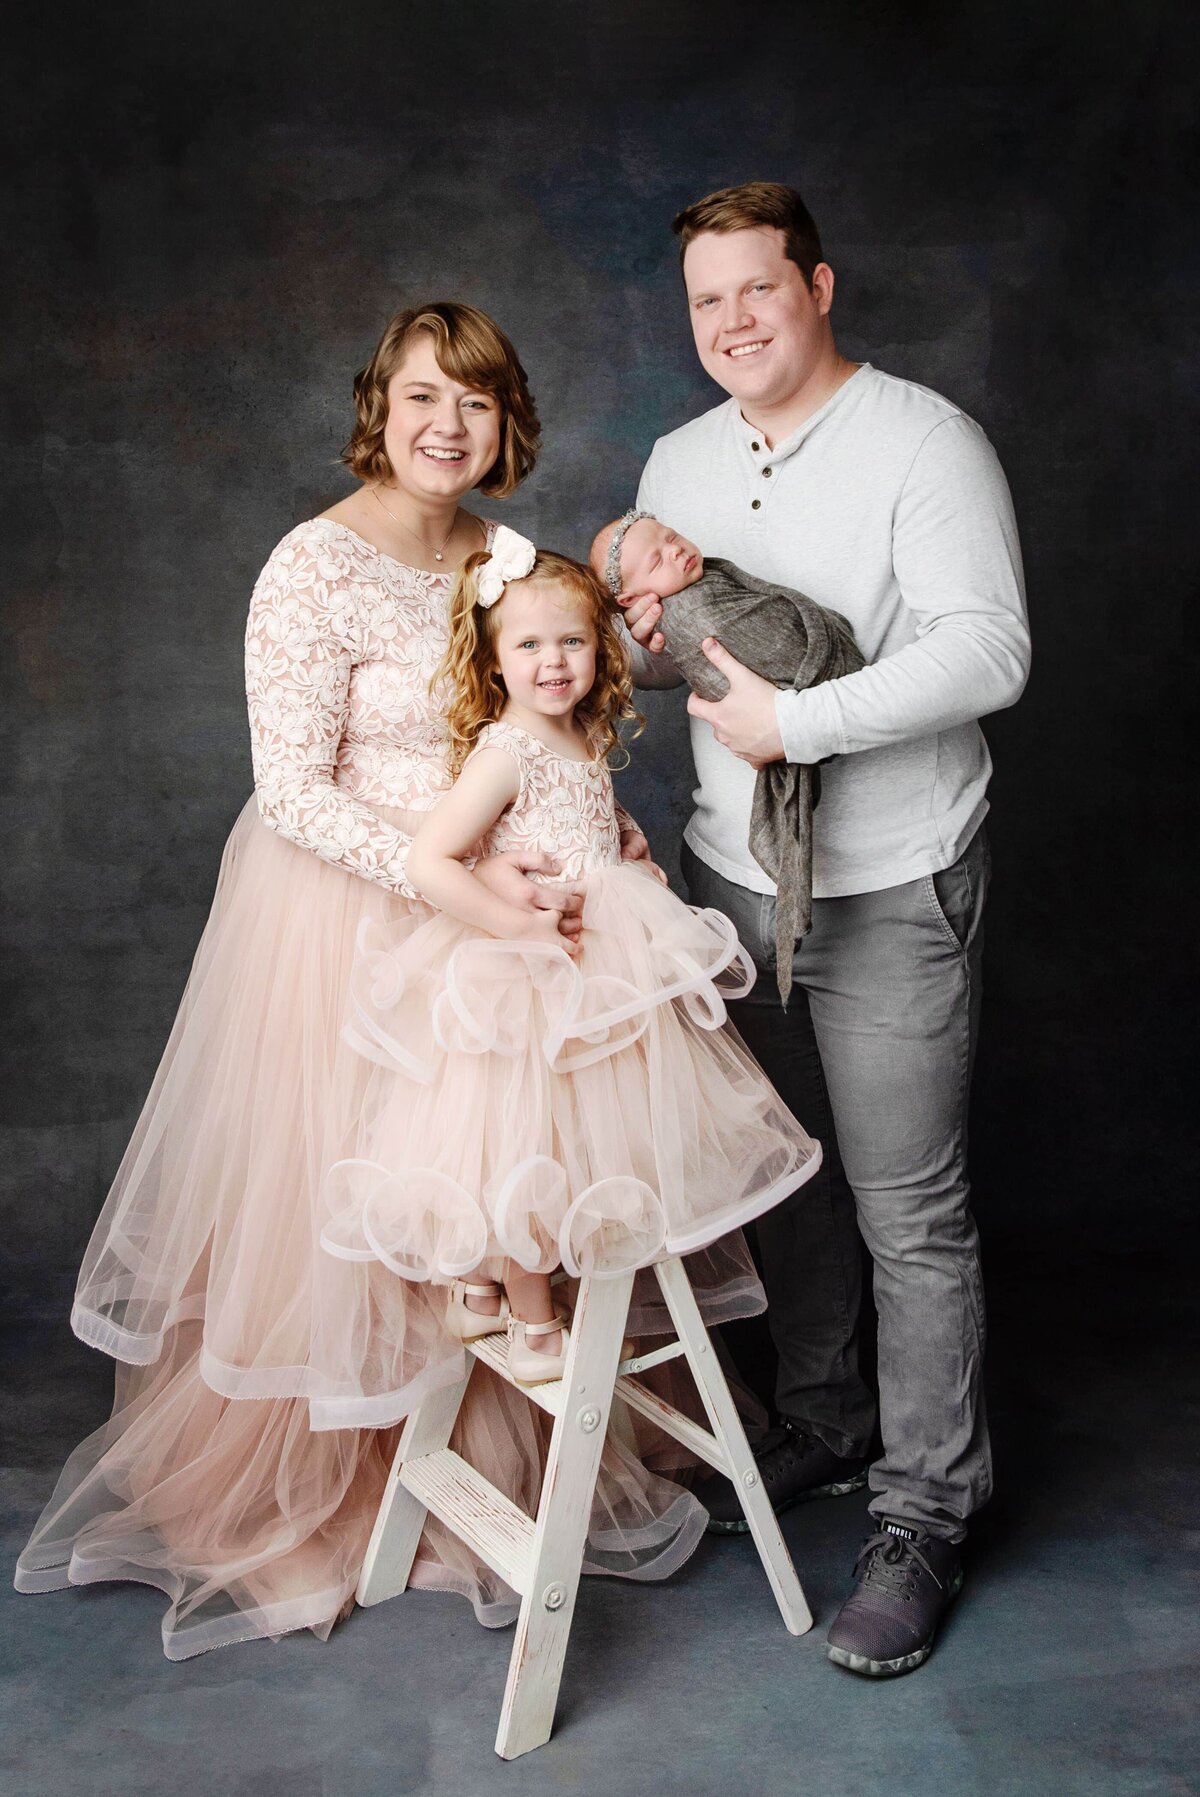 st-louis-newborn-photographer-mom-dad-big-siter-and-baby-family-picture-in-pink-gowns